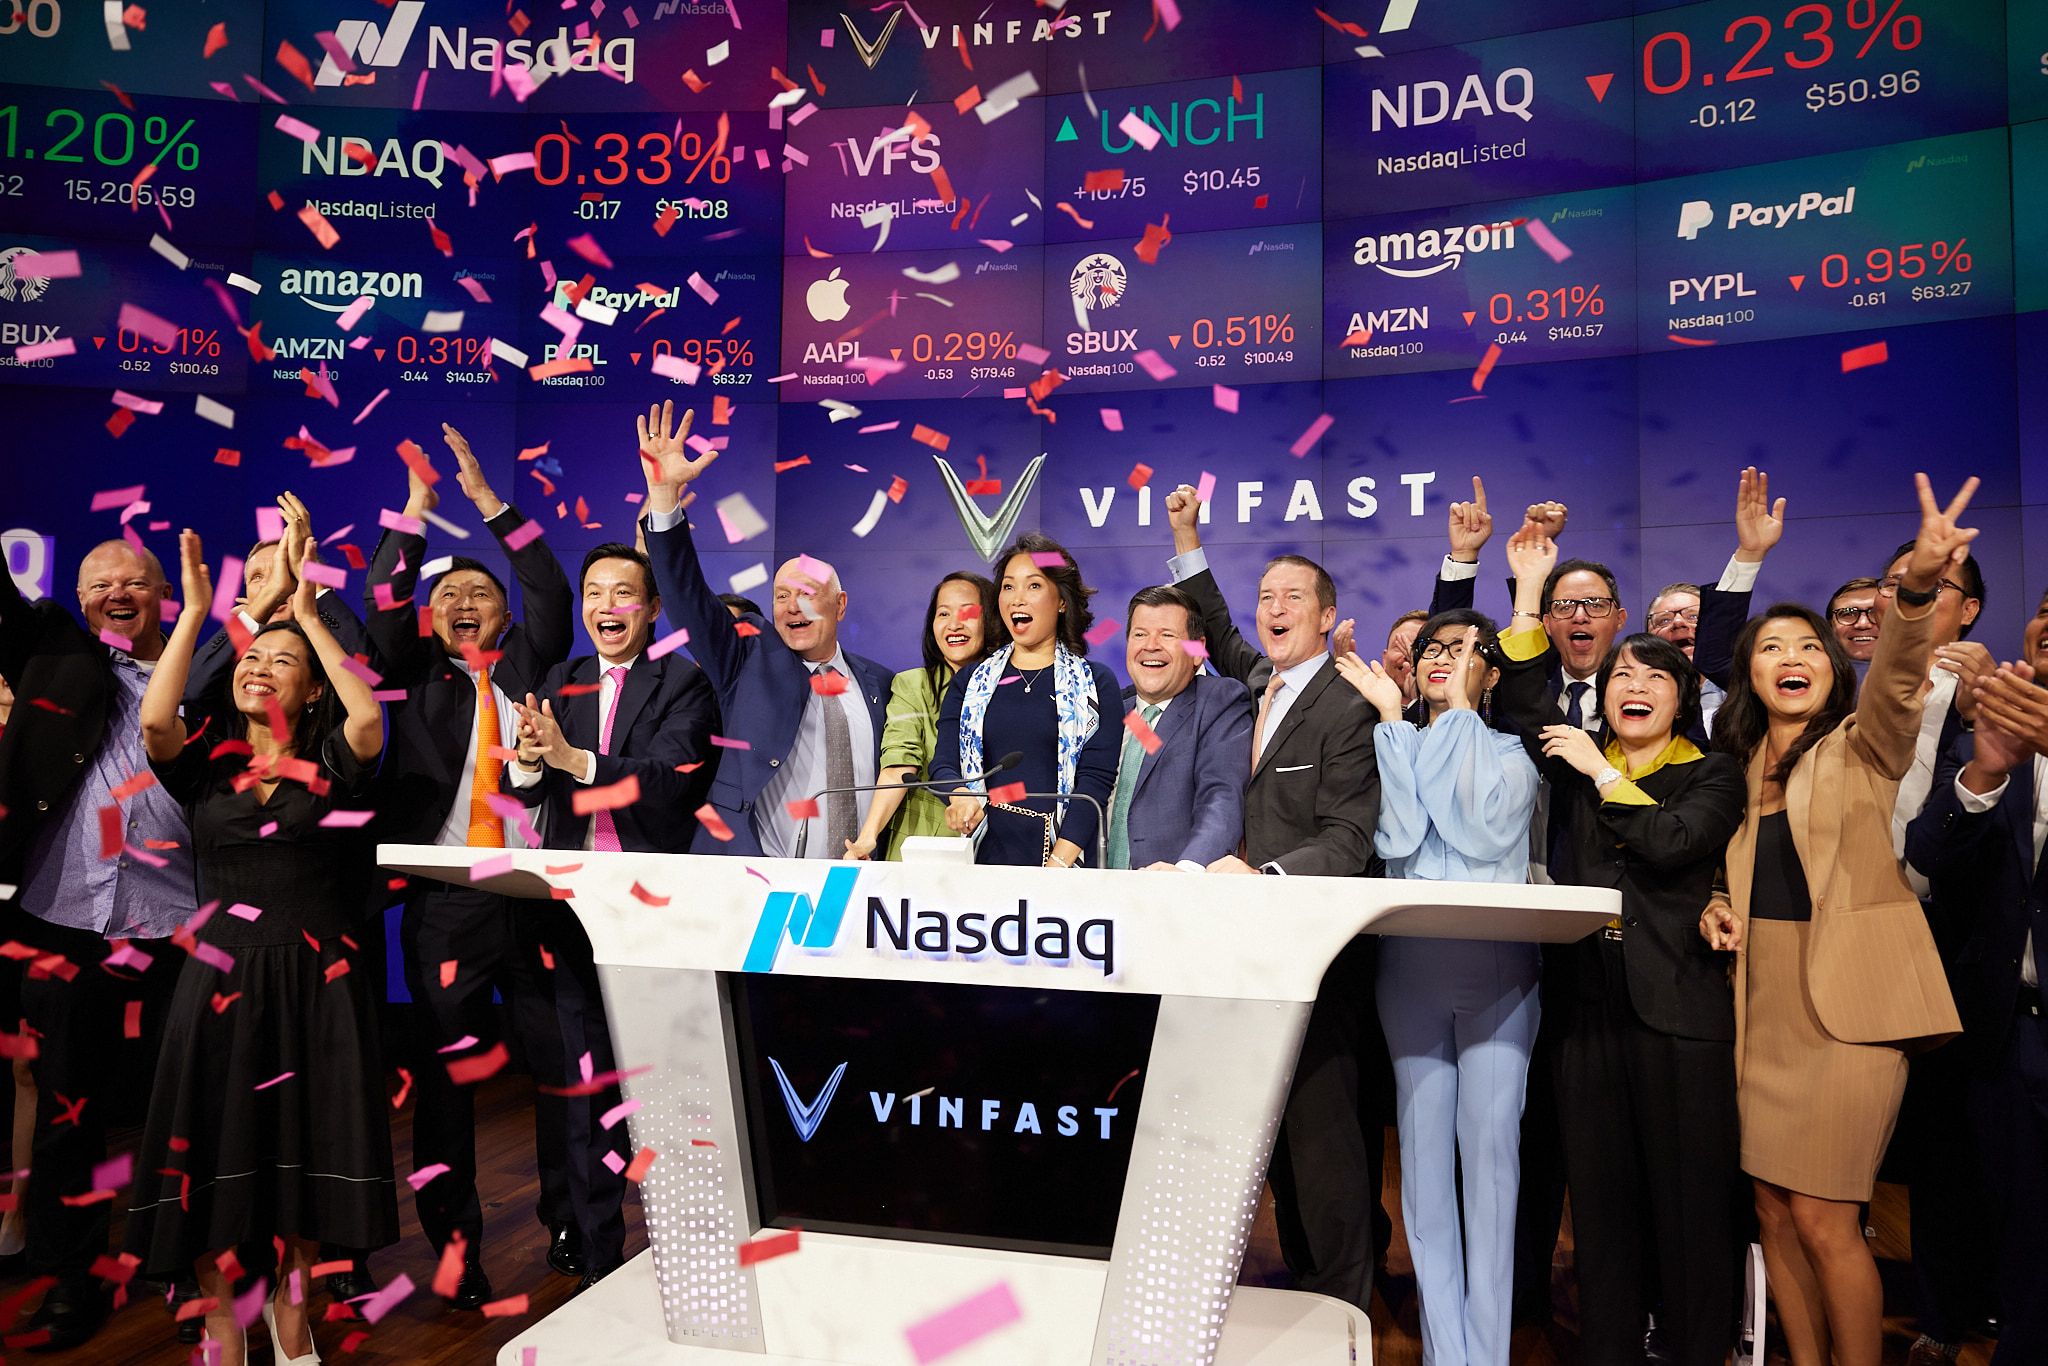 VINFAST DEBUTS ON NASDAQ GLOBAL SELECT MARKET FOLLOWING SUCCESSFUL BUSINESS COMBINATION WITH BLACK SPADE ACQUISITION CO 